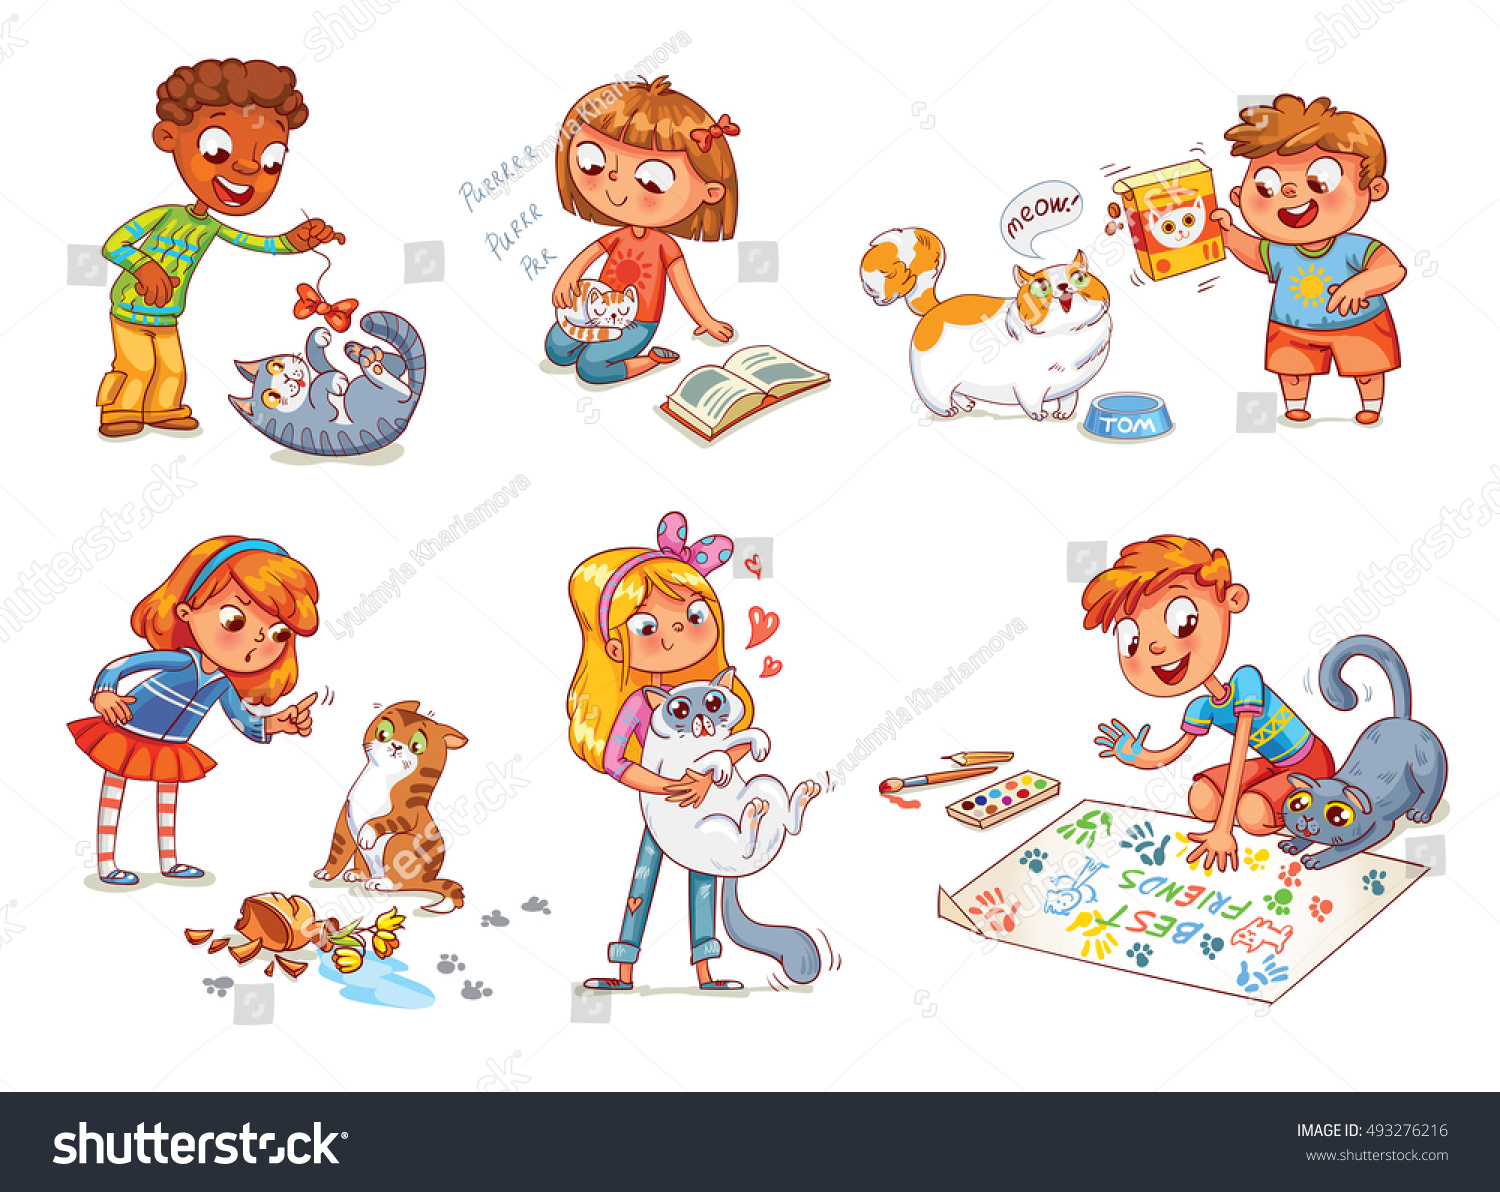 SVG of Boy teasing cat. Little kitten fell asleep in lap of owner. Fat cat begging for feed. Girl scolding pet for disobedience and broken things. Boy and cat together paint picture. Funny cartoon character svg